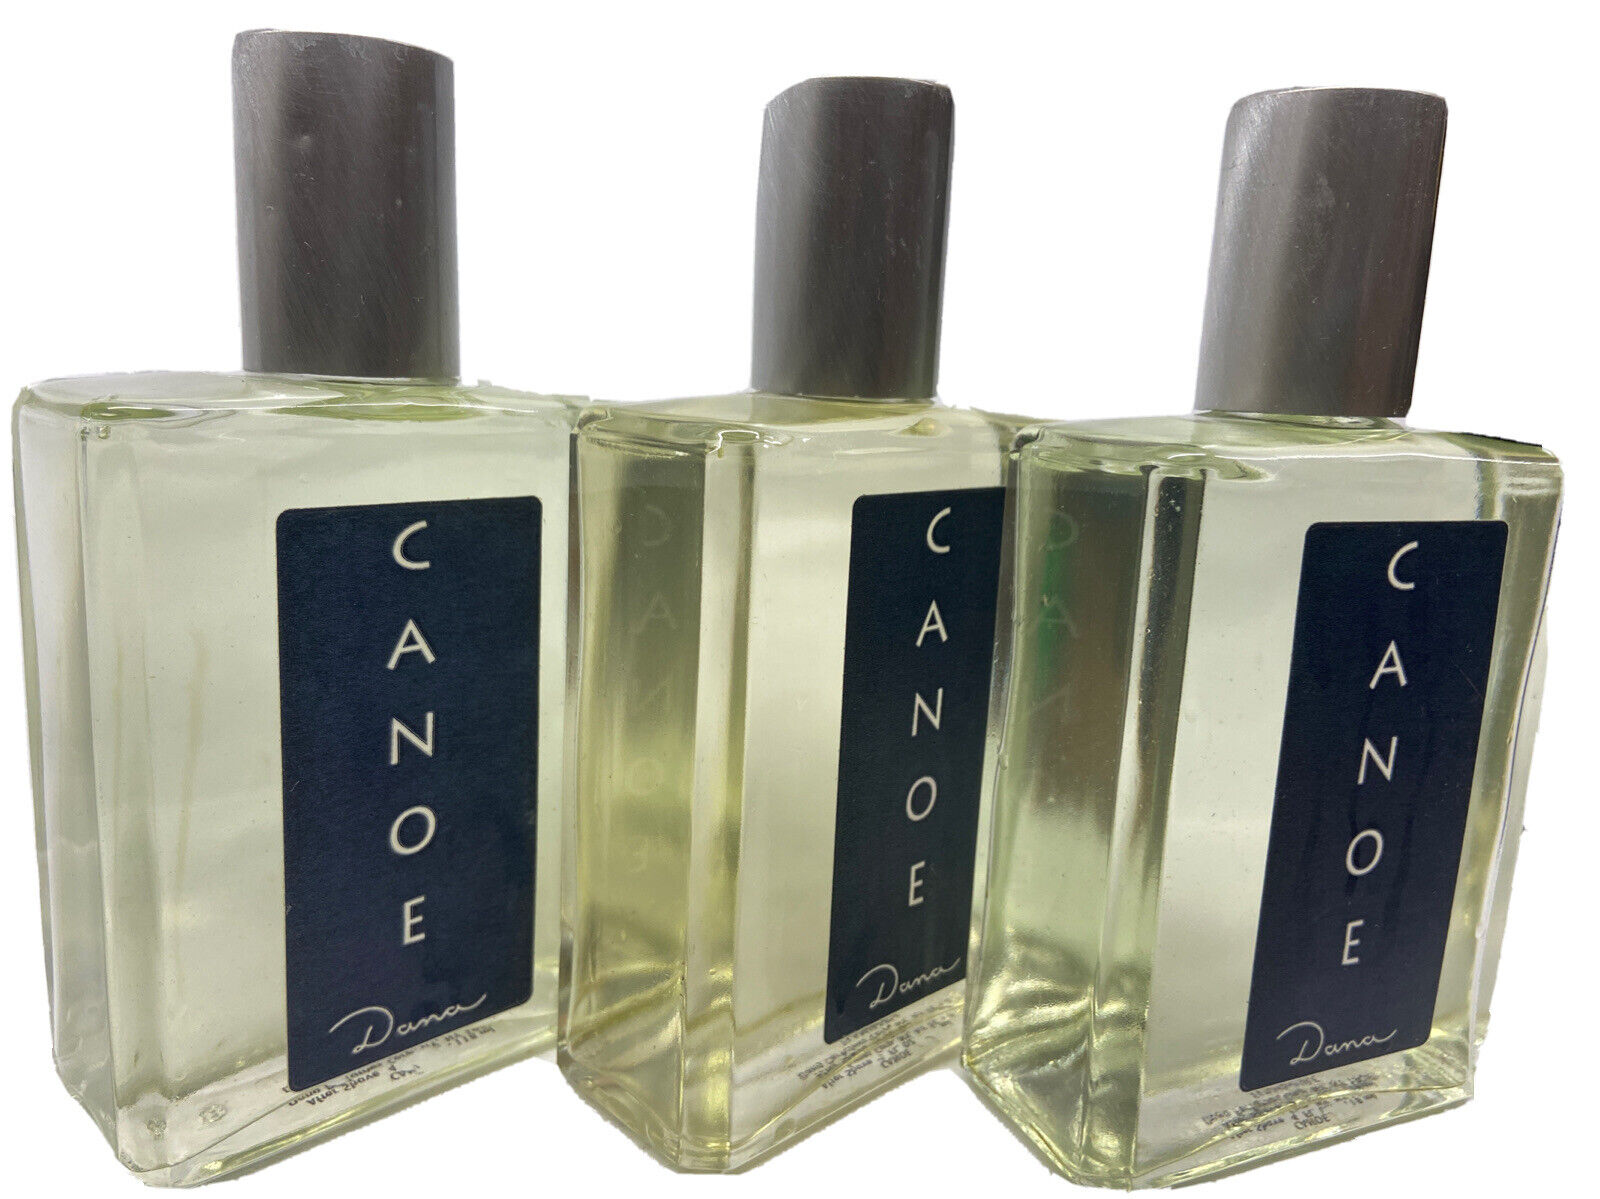 3 canoe aftershave for men 4oz ea by dana scuffed caps